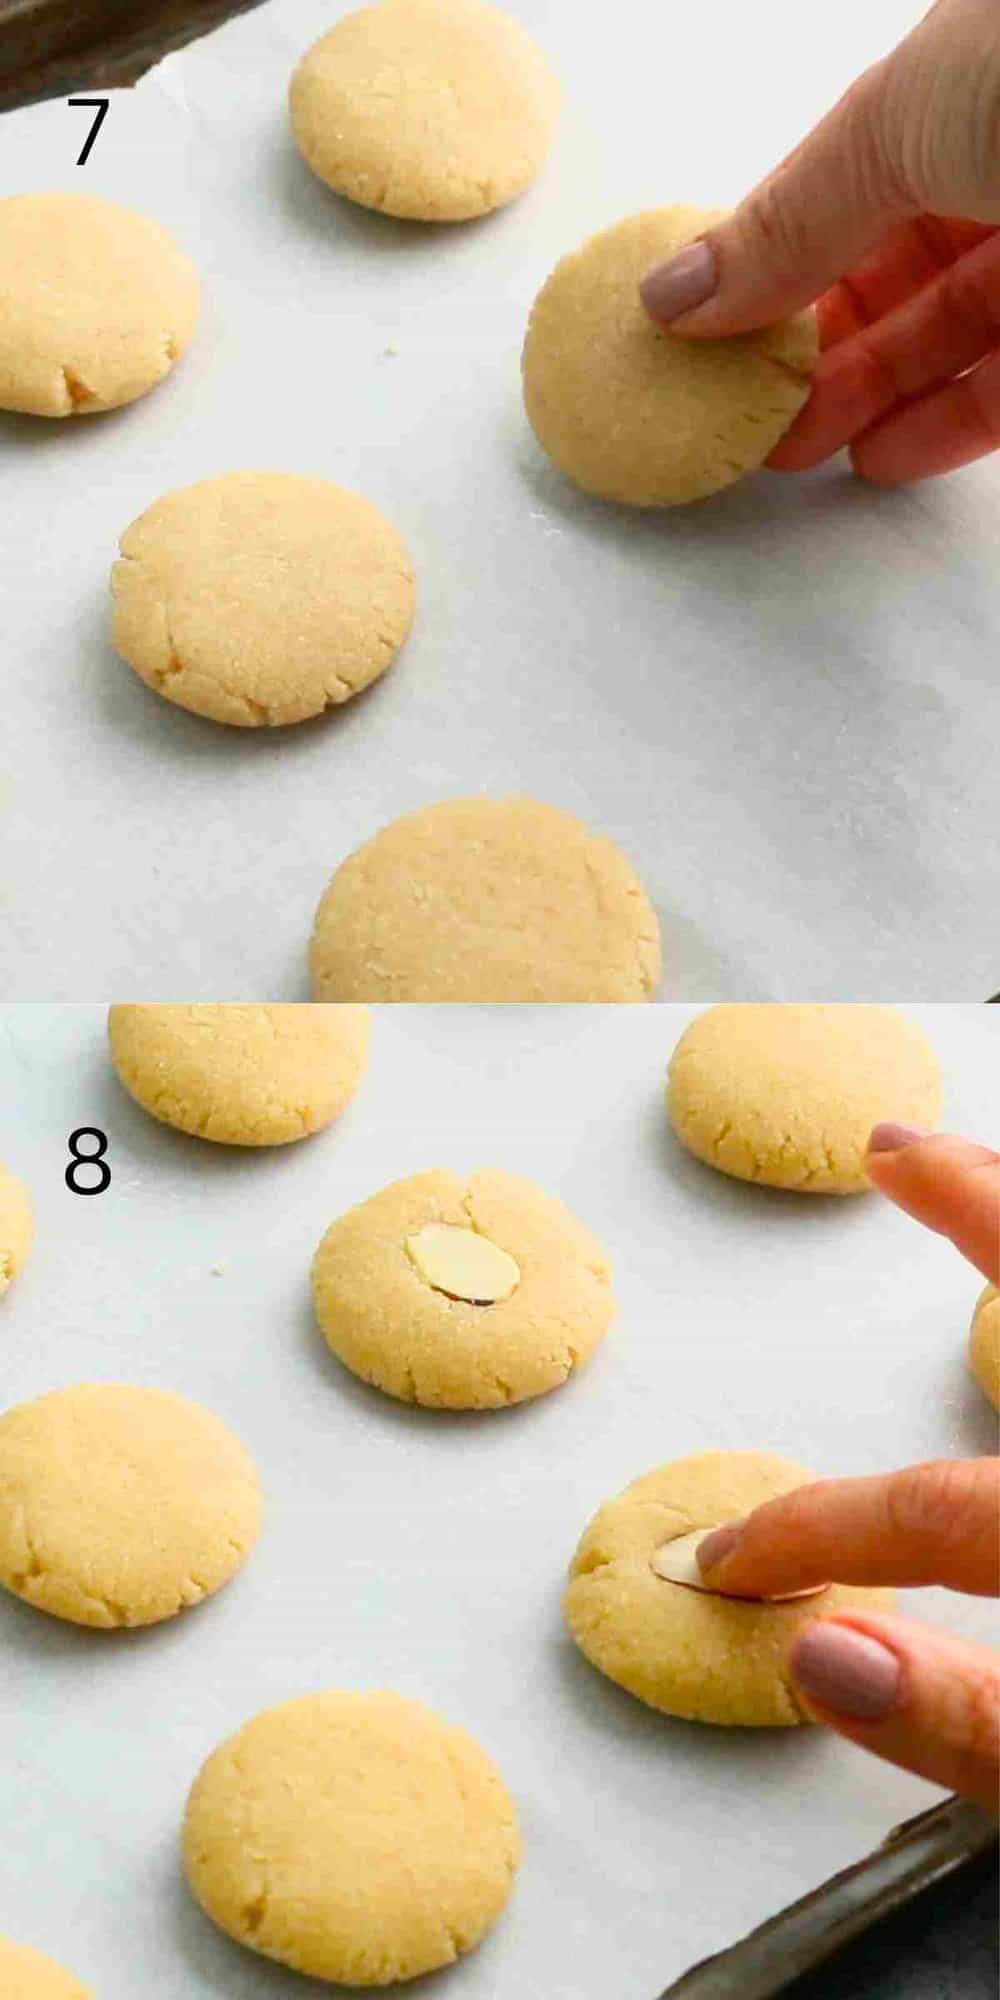 a hand placing a shaped cookies on a parchment lined baking sheet.